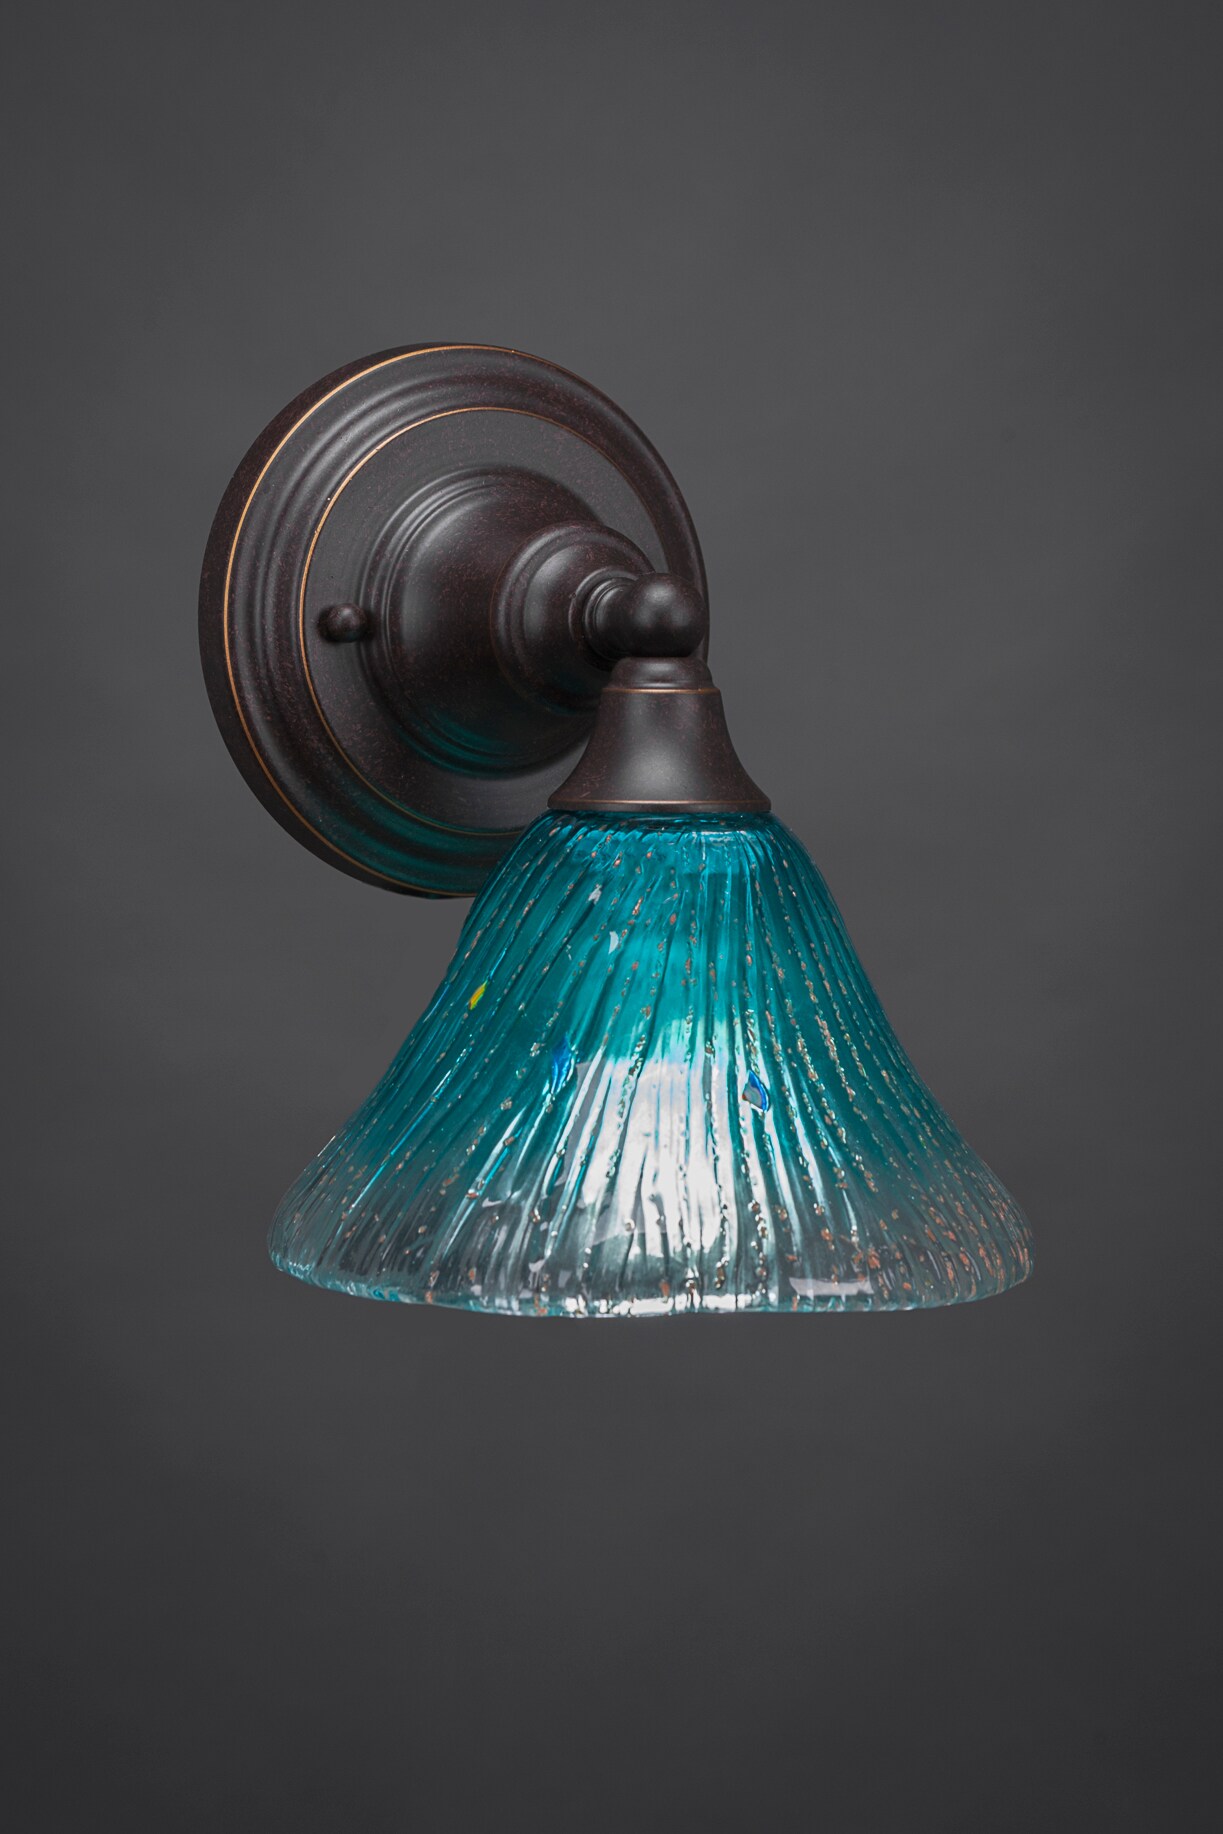 Wall Sconce Shown In Dark Granite Finish With 7 Teal Crystal Glass